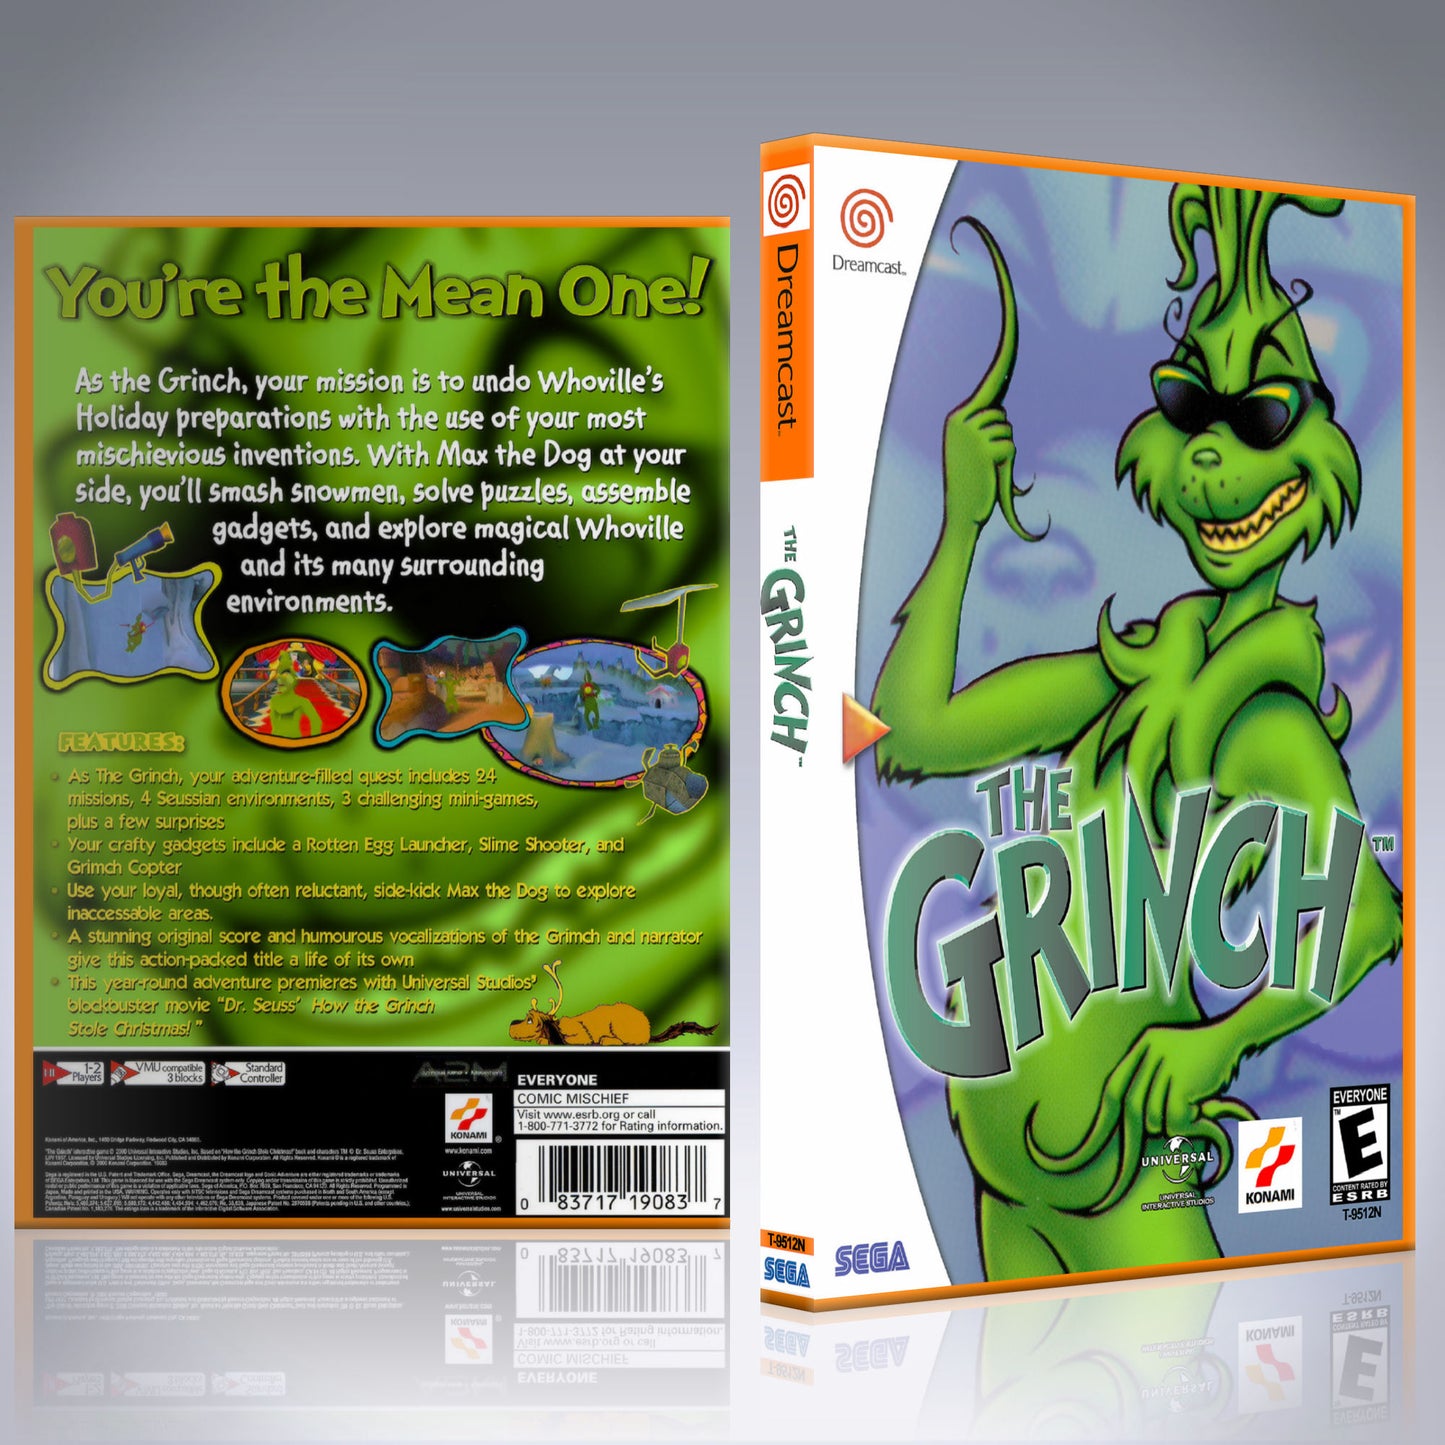 Dreamcast Custom Case - NO GAME - The Grinch